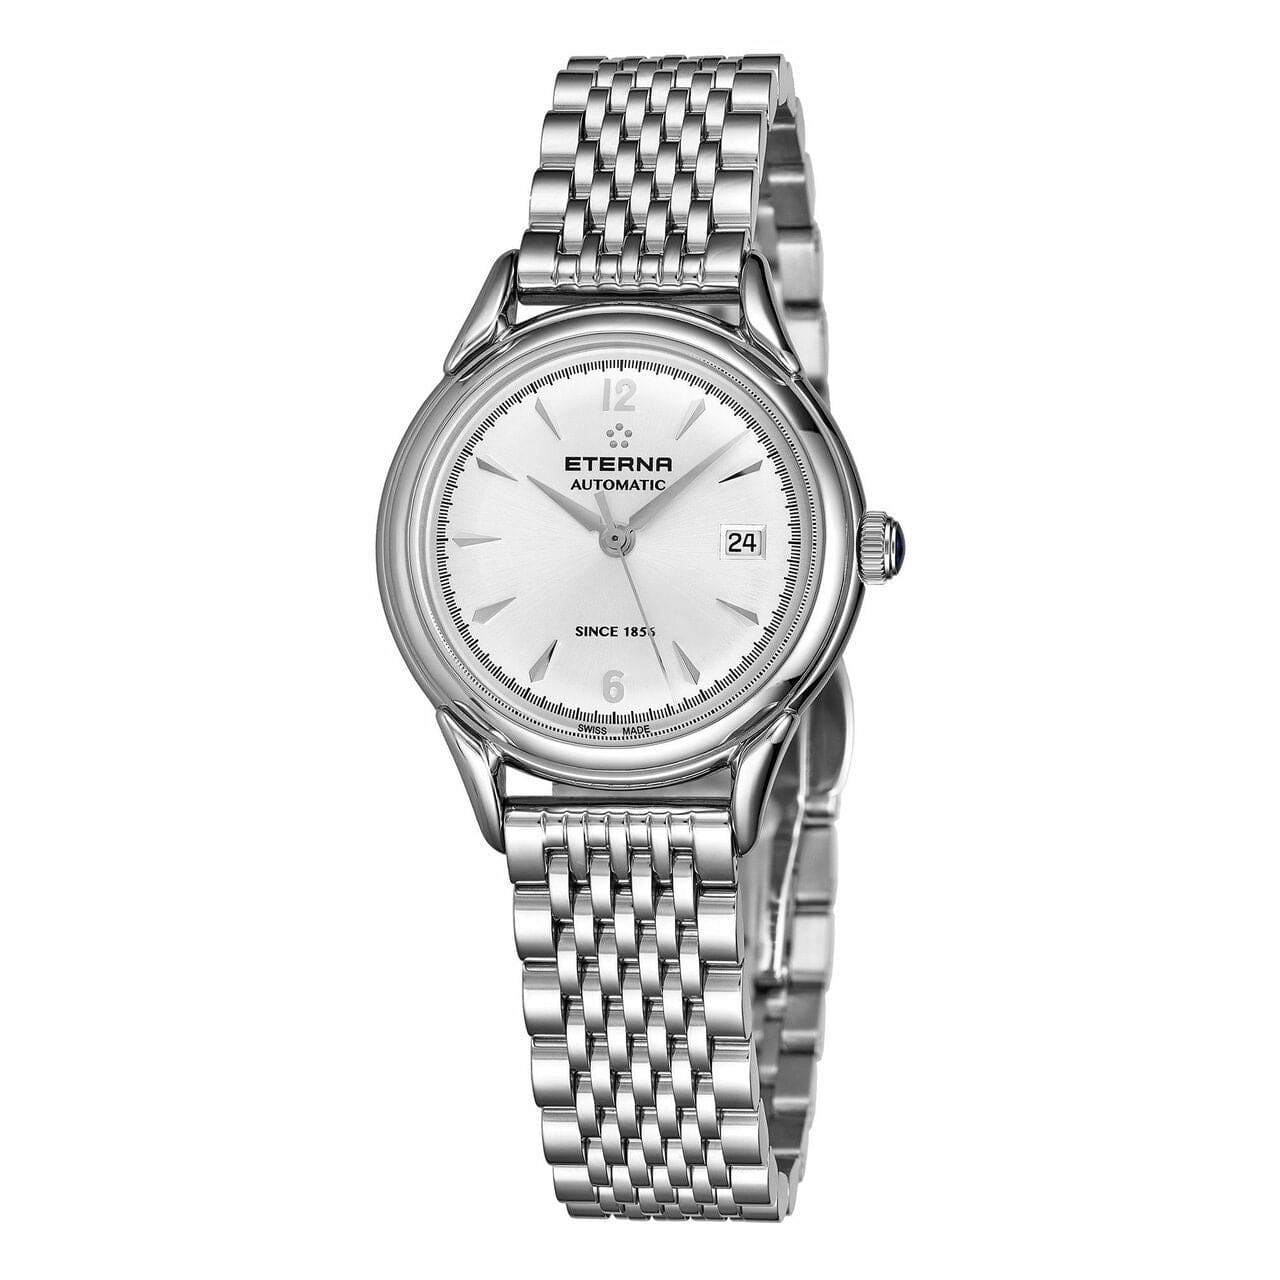 Eterna 2956.41.13.1742 Heritage 1948 Stainless Steel Silver Dial Women's Automatic Watch 794504368642